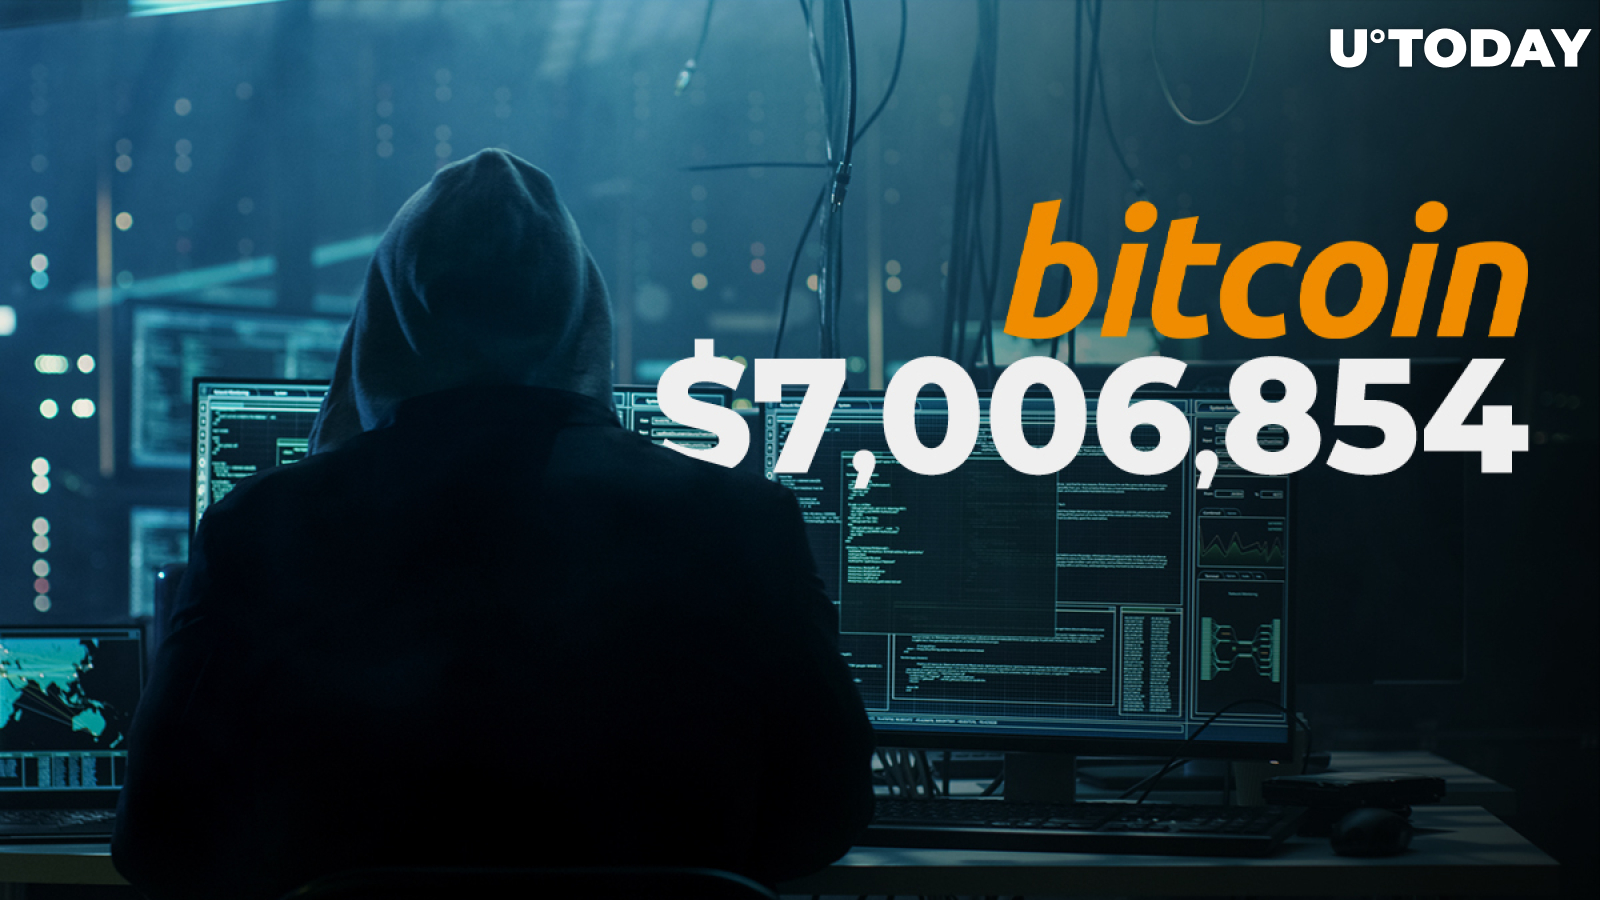 Crypto Hackers Shift $7,006,854 in Bitcoin from Money "Obtained" from Bitfinex in 2016 Attack